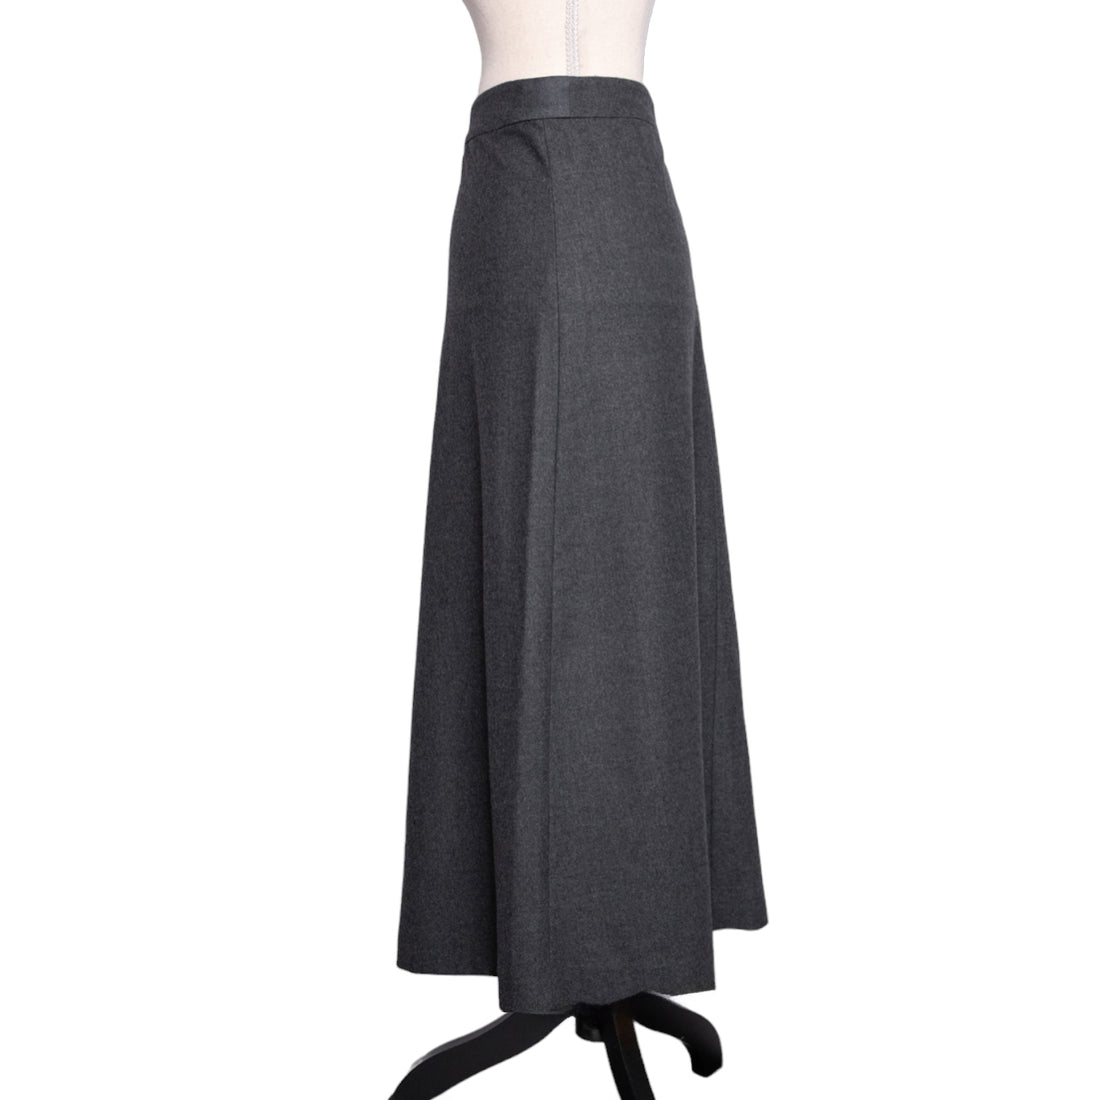 Theory A-line skirt in midi length